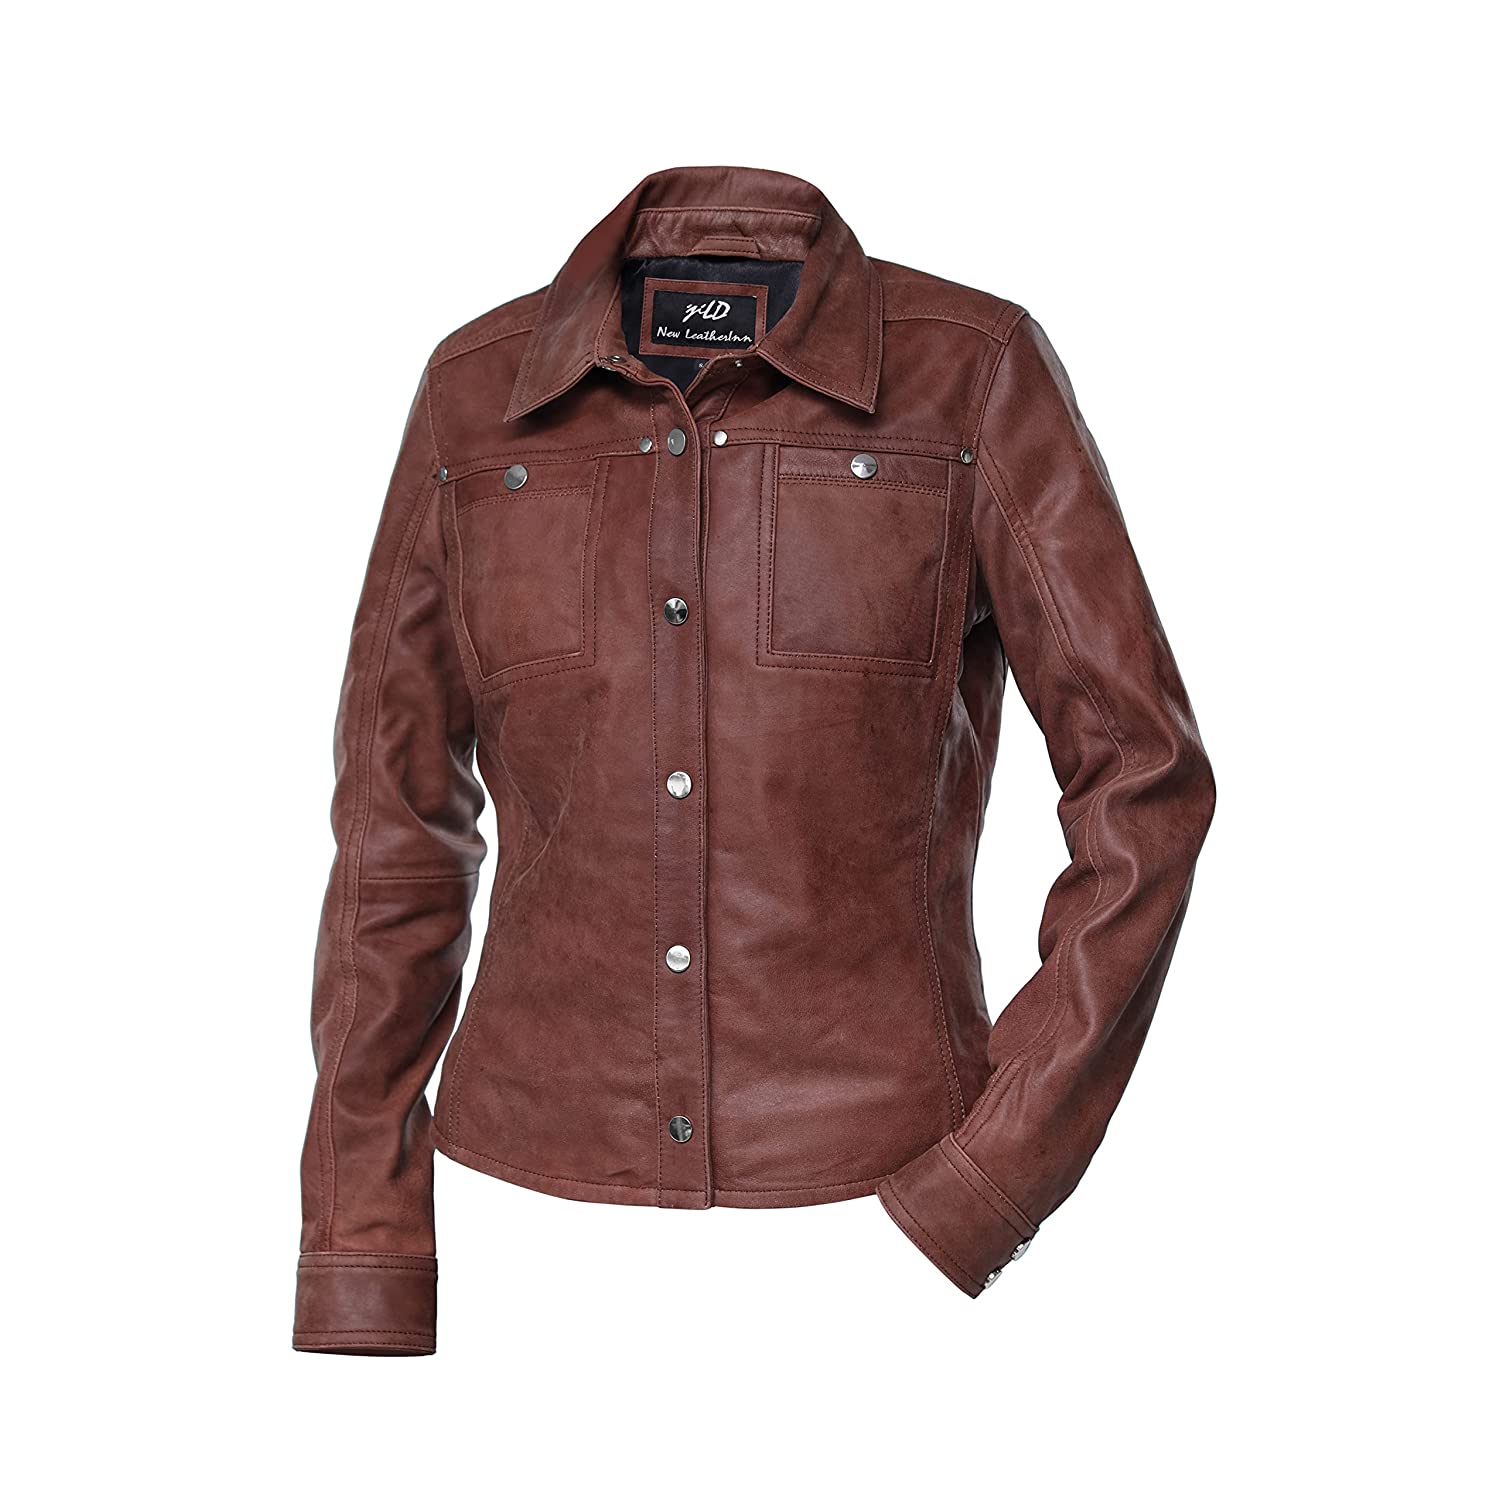 Womens Vintage Brown Shirt Style Leather Jacket